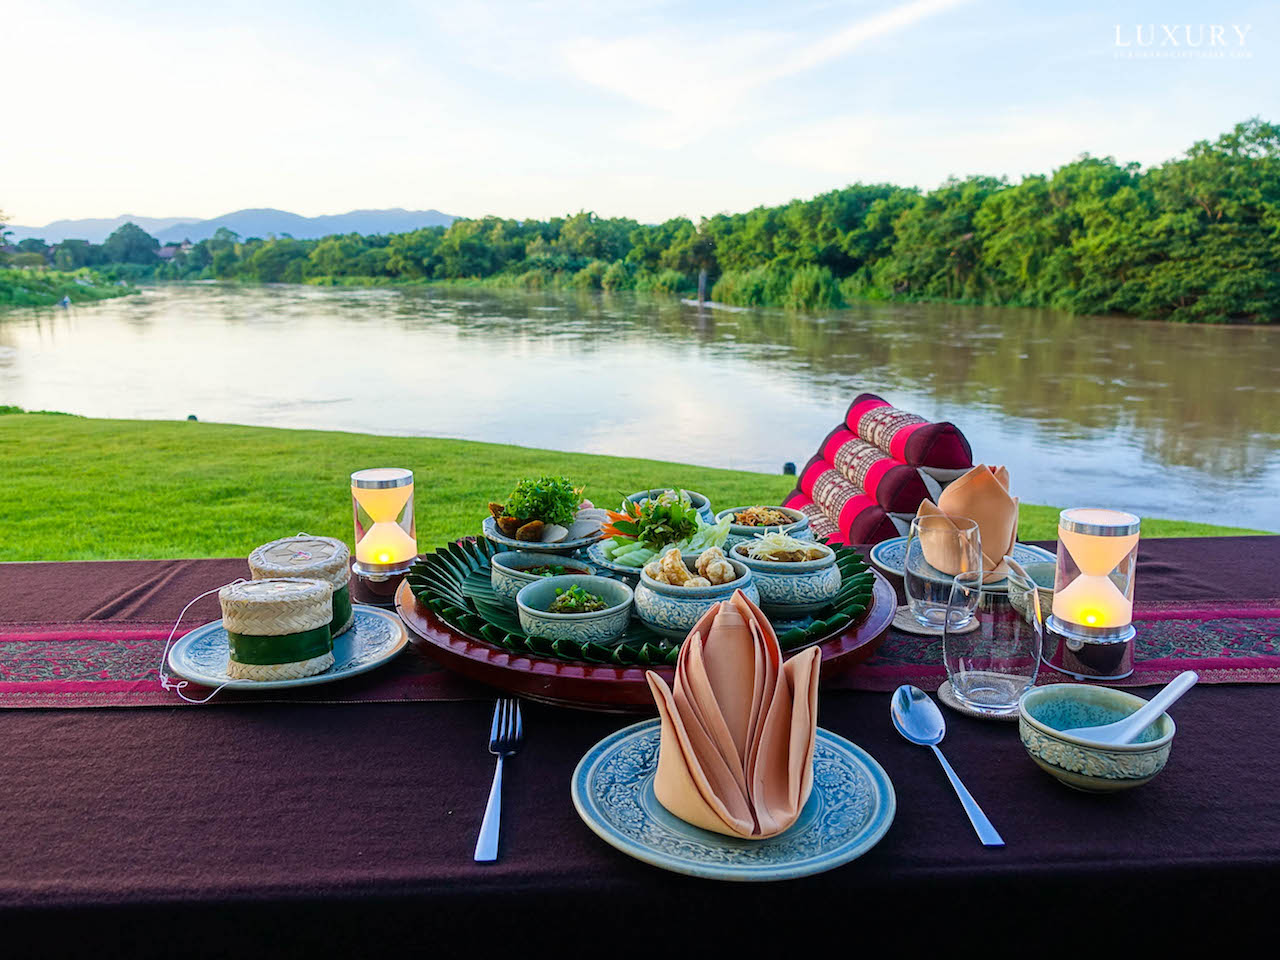 Chiang Rai’s Riverside Scene – The Blossom by the Riverie